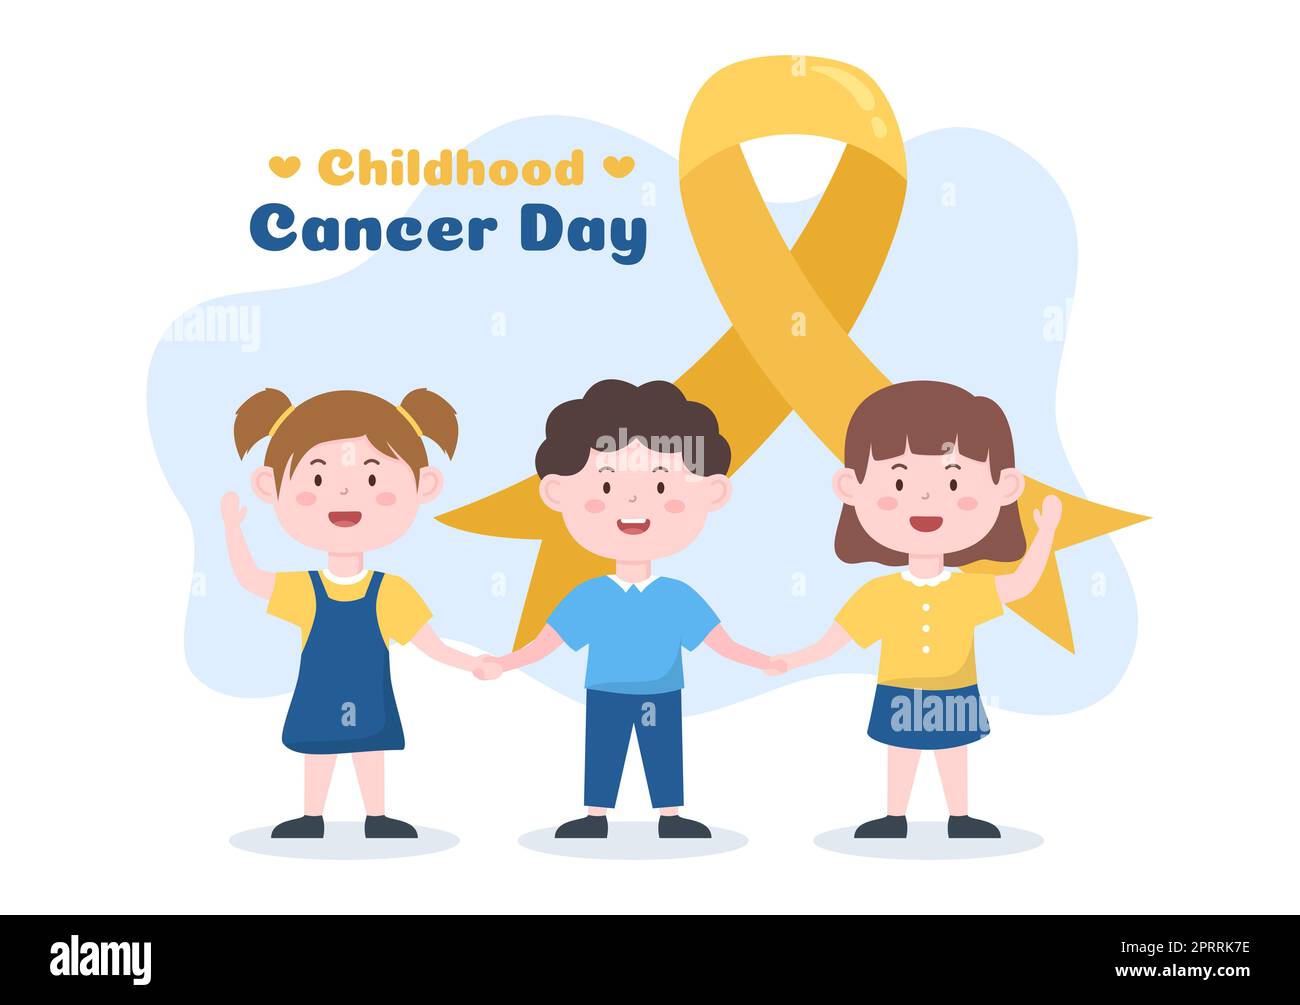 International Childhood Cancer Day Hand Drawn Cartoon Illustration on February 15 for Raising Funds, Promoting the Prevention and Express Support Stock Photo